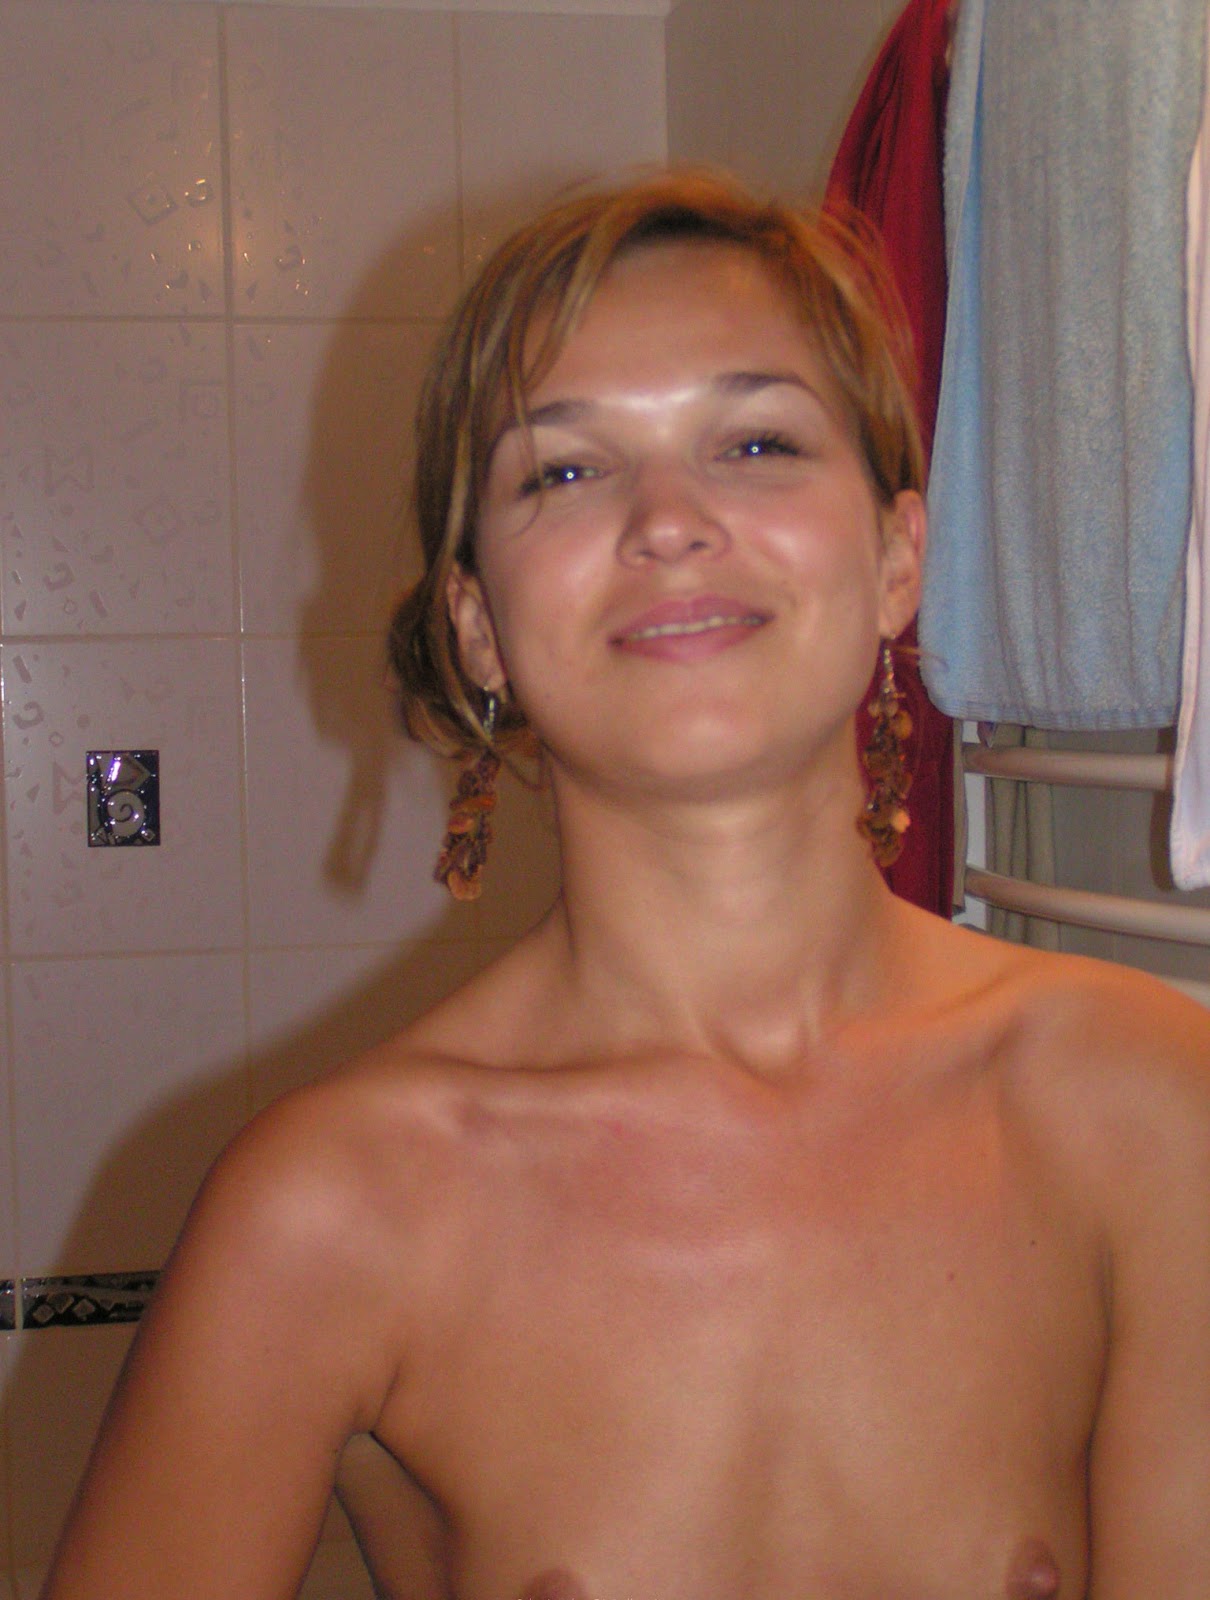 Arielle kebbel nude pictures